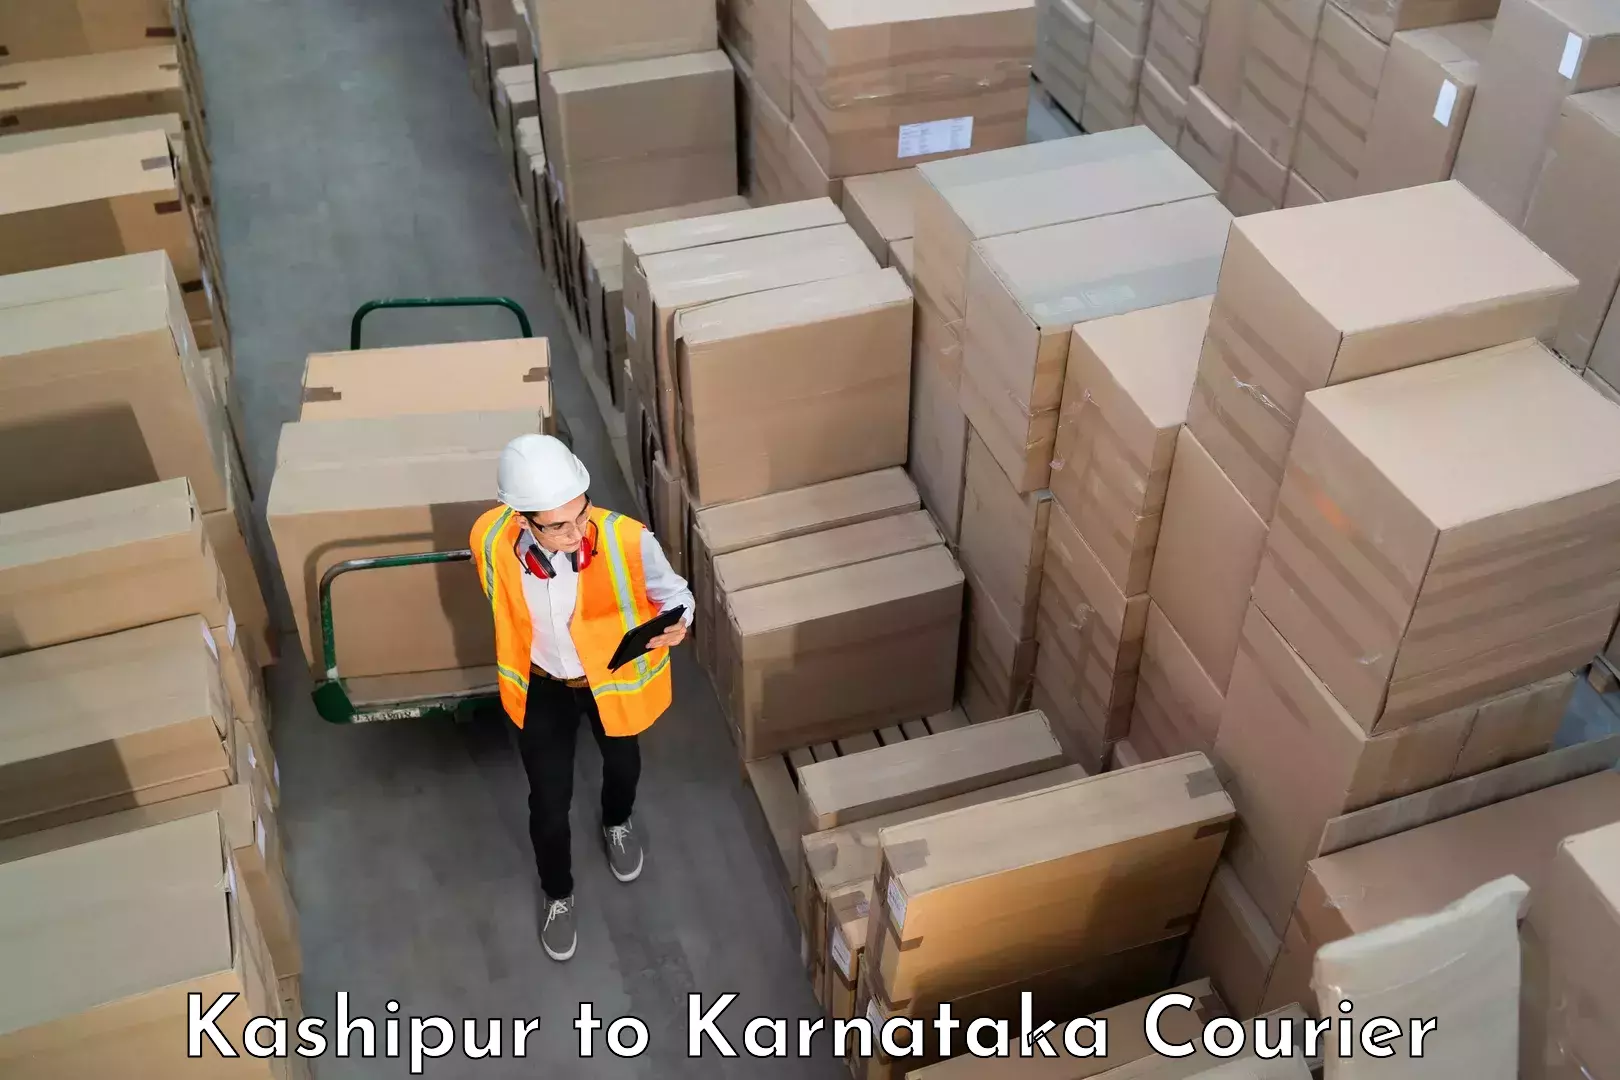 Baggage transport management Kashipur to Manipal Academy of Higher Education